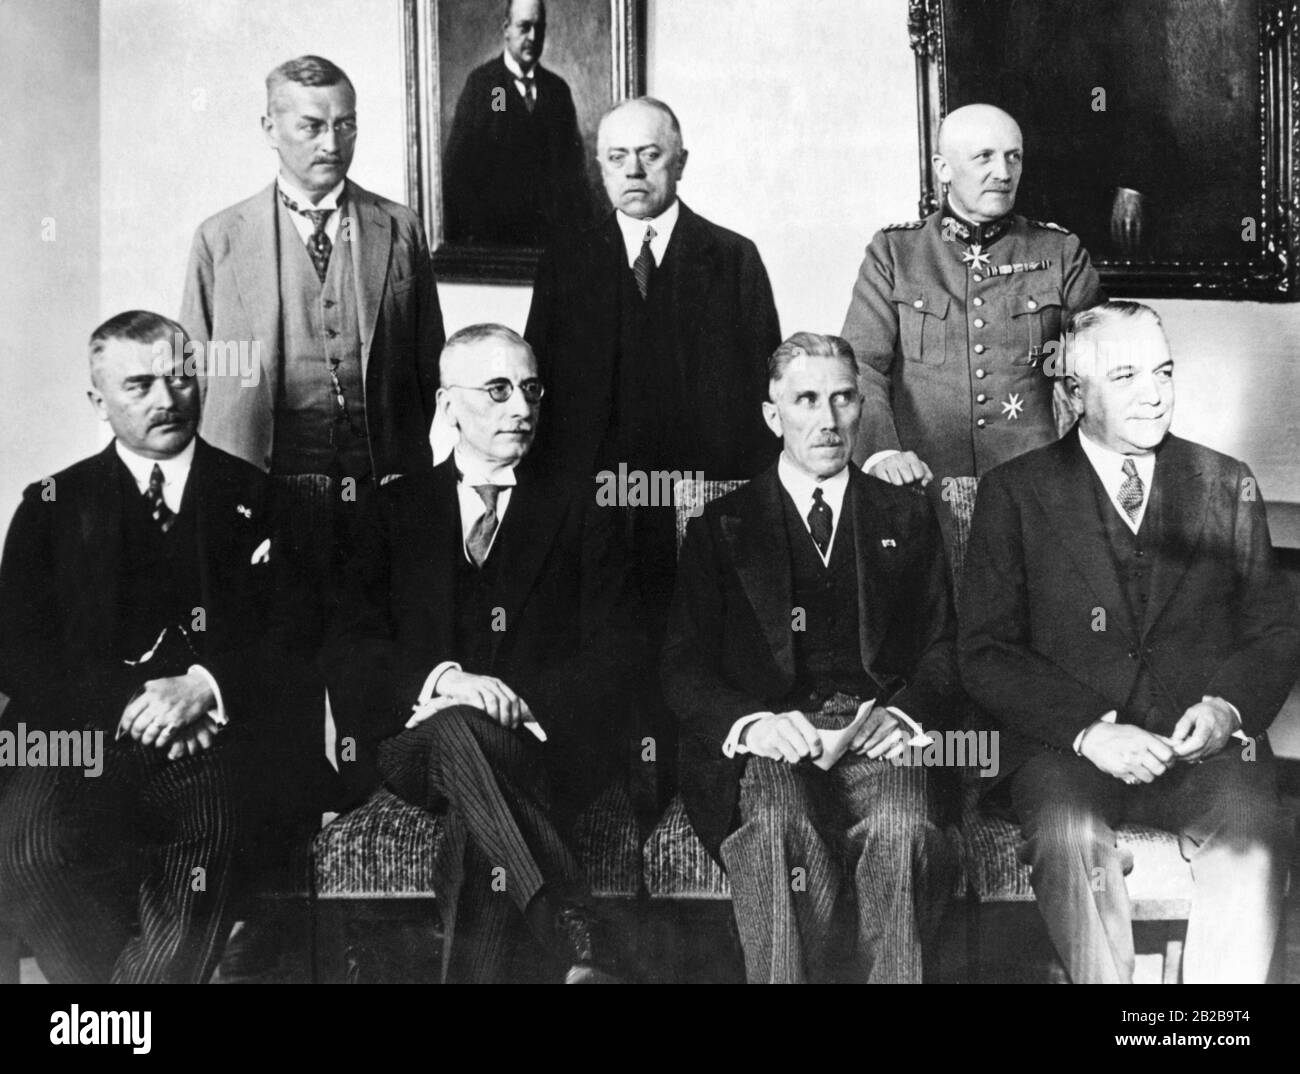 Picture of the cabinet of Reich Chancellor Franz von Papen, who took over the leadership on 30.05.1932. From left to right in the 1st row Freiherr von Braun, Freiherr von Gayl, Franz von Papen, Freiherr von Neurath. In the 2nd row Dr Guertner, Prof Dr. Warmbold, Kurt von Schleicher. Stock Photo